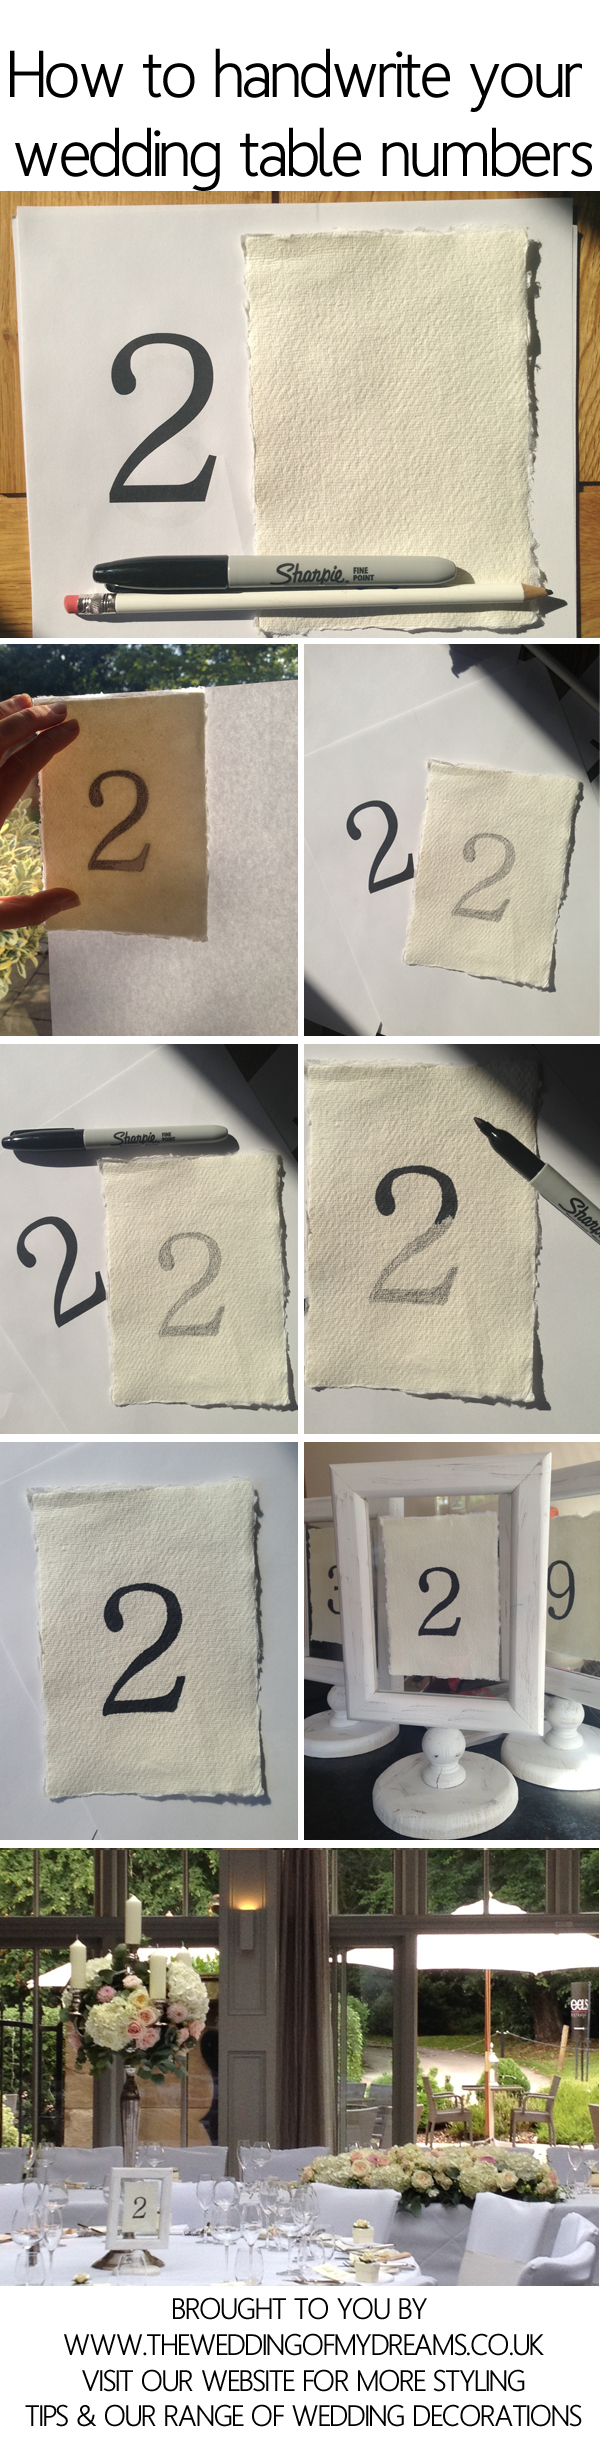 HOW TO HANDWRITE TRACE WEDDING TABLE NUMBERS